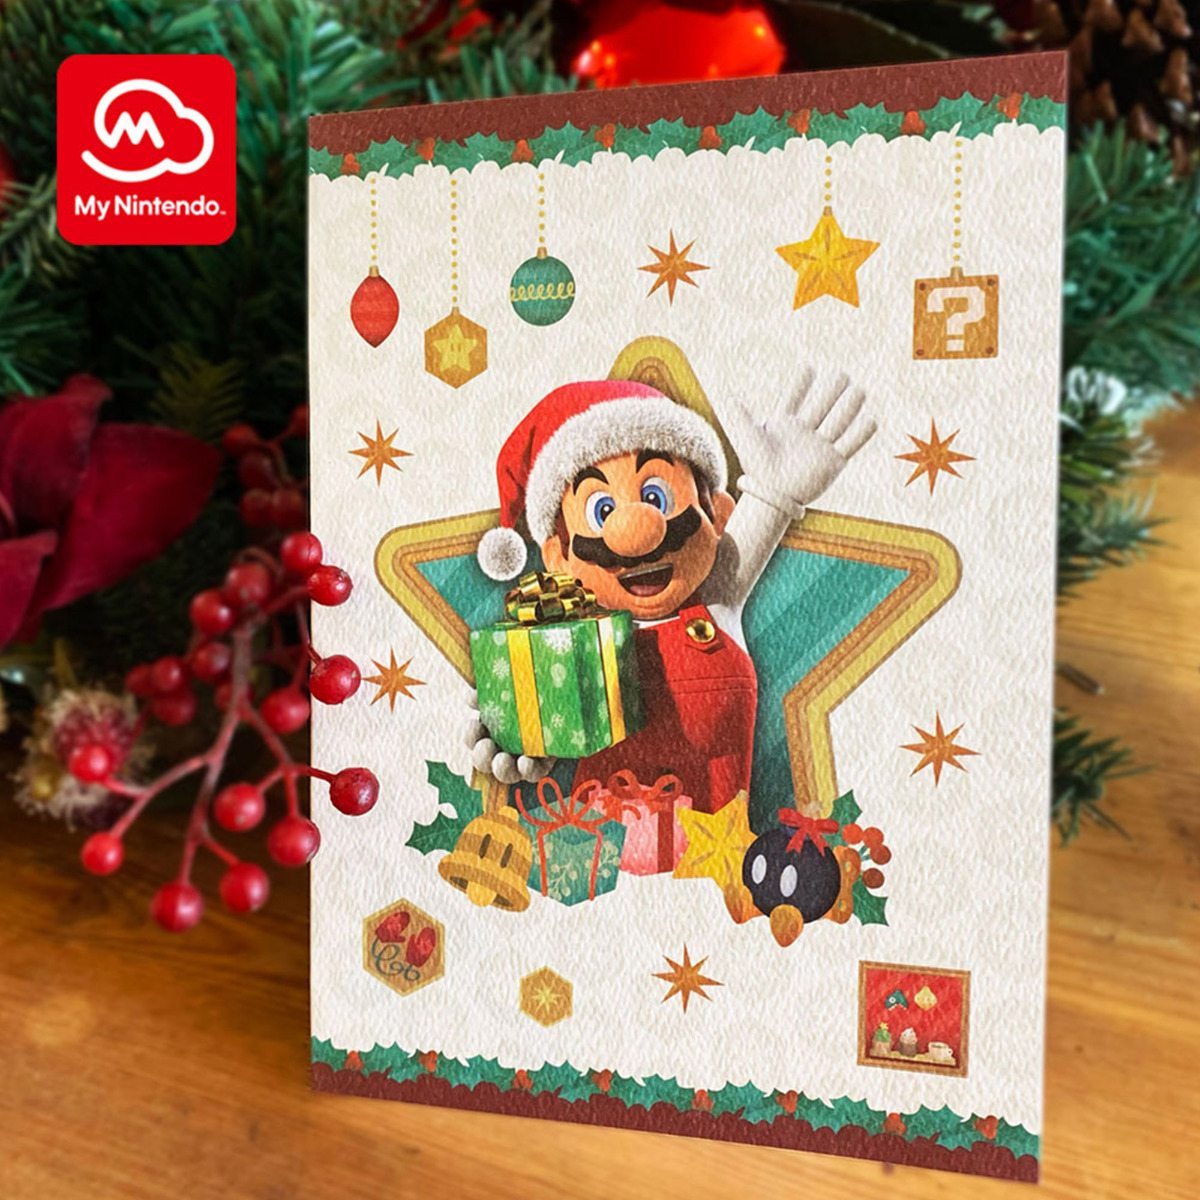 My Nintendo adds Mario ornament, holiday cards in North America